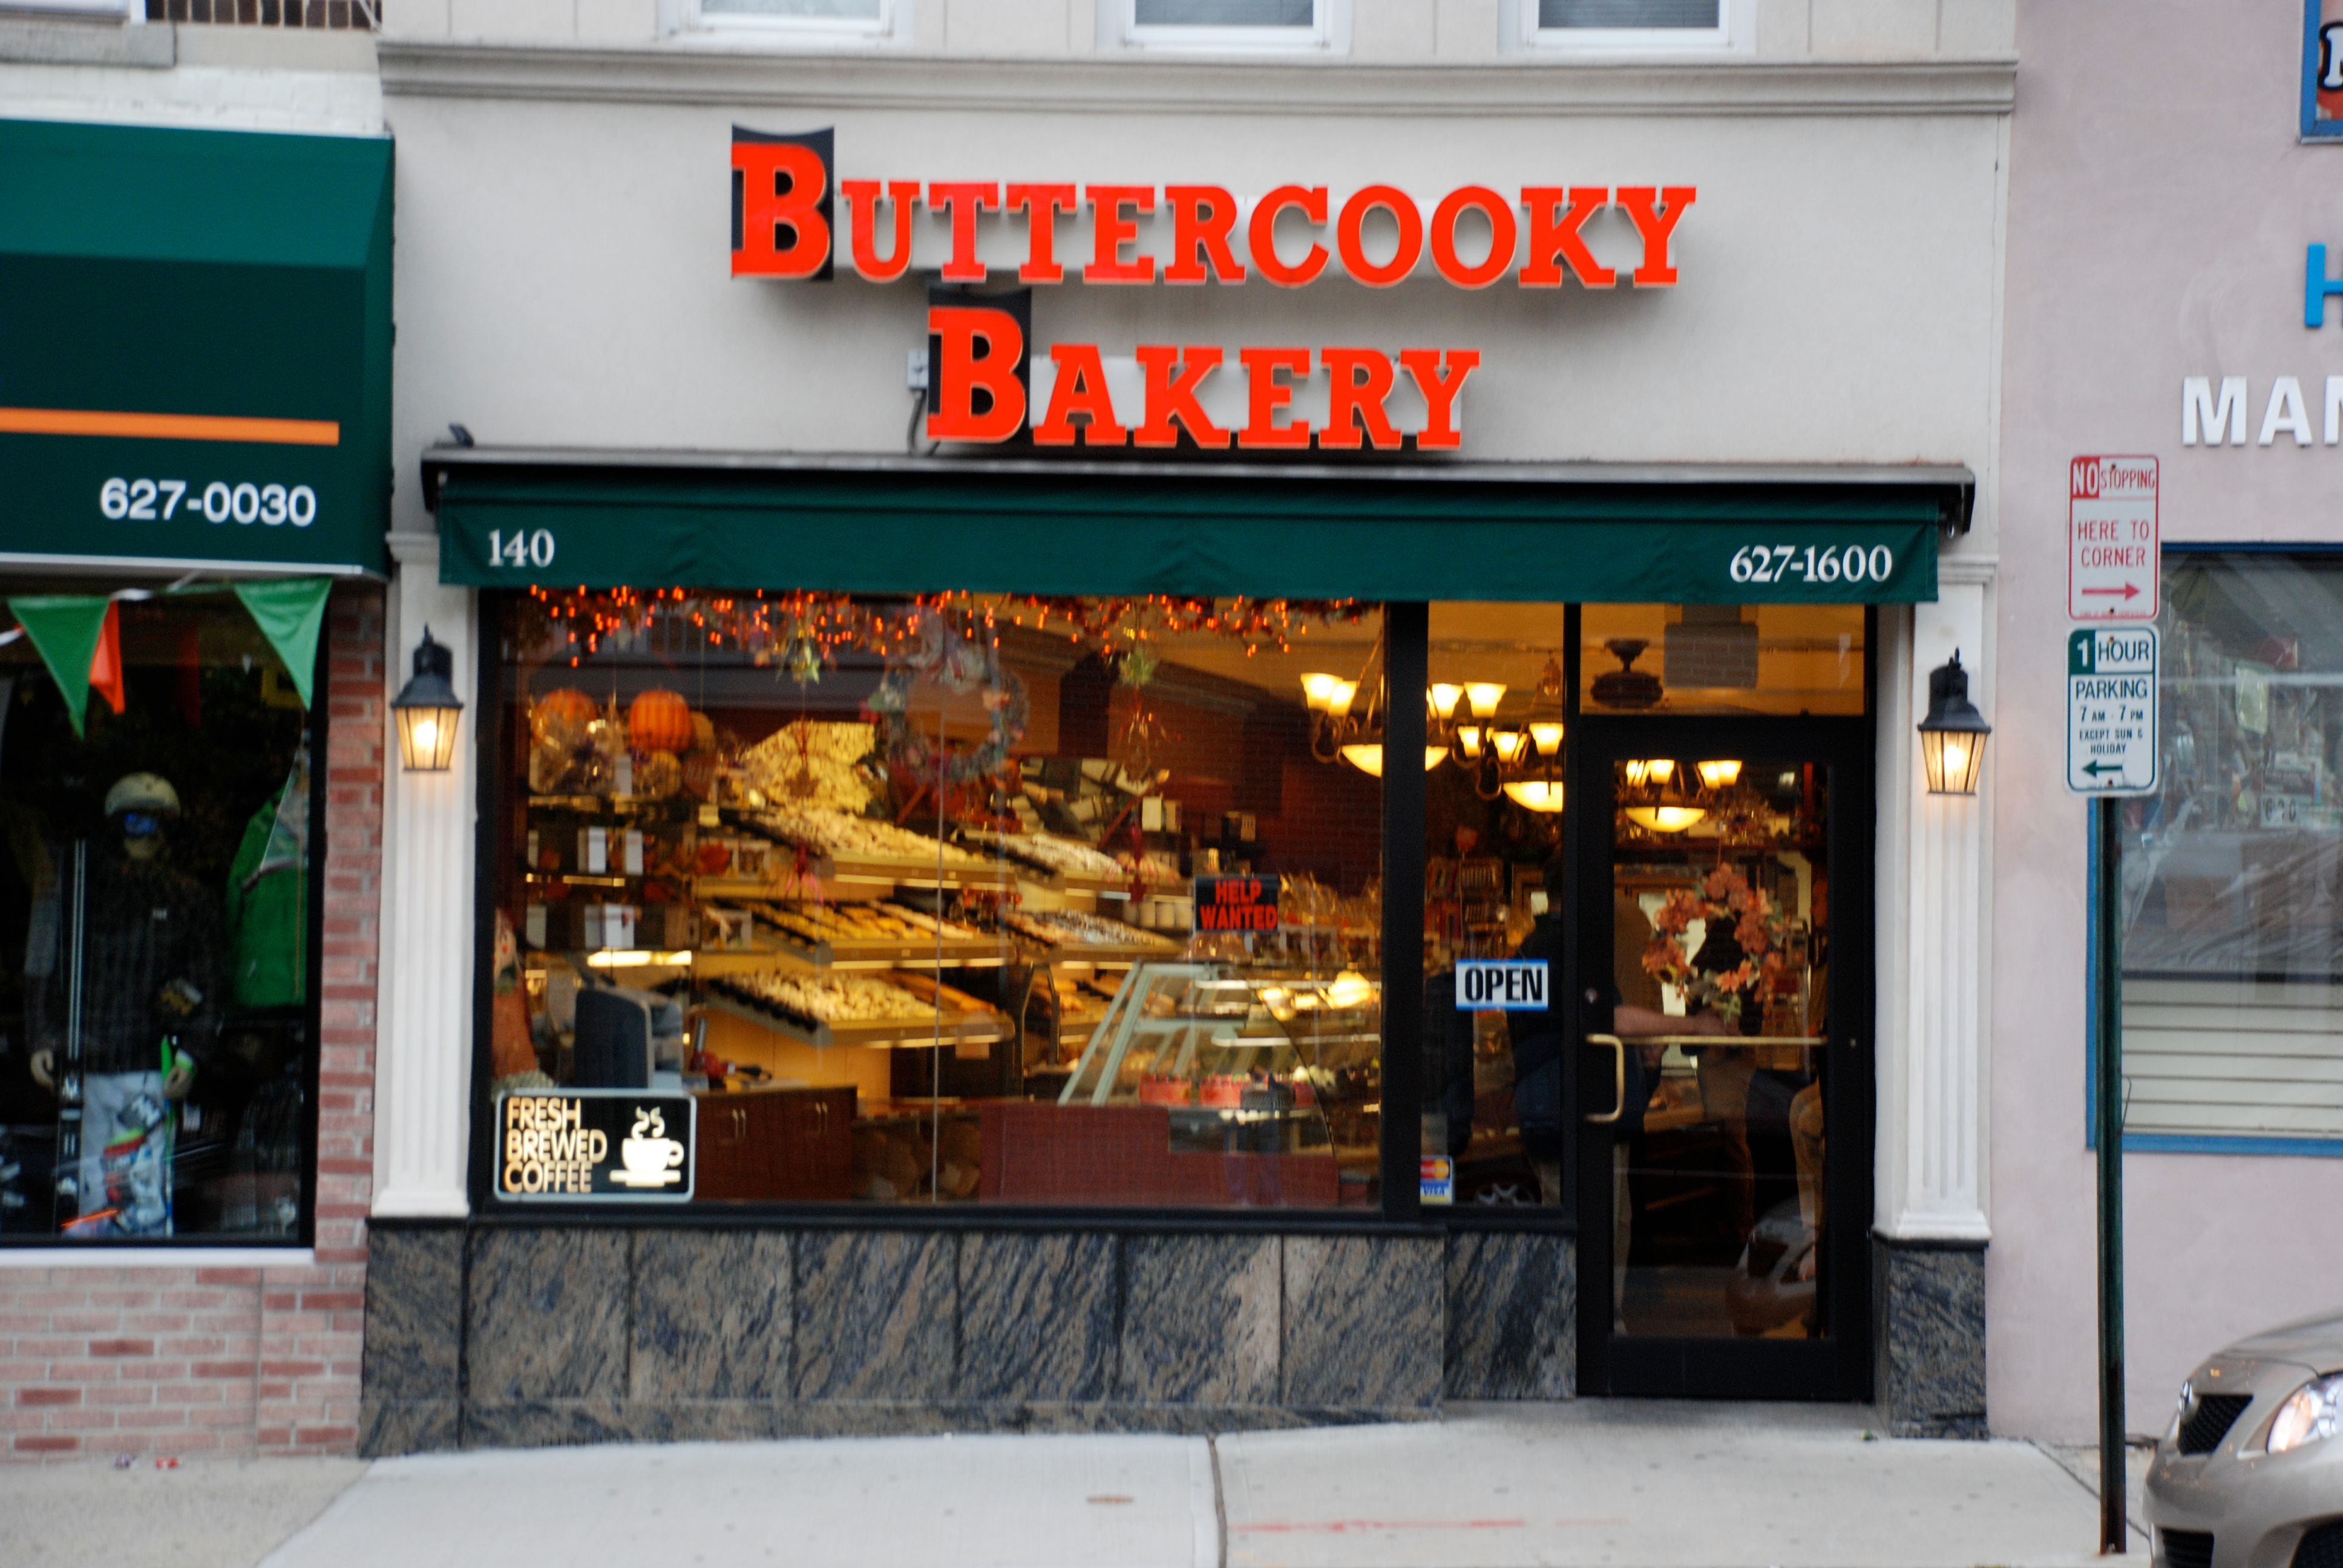 Buttercooky Bakery Coupons near me in Manhasset, NY 11030 ...